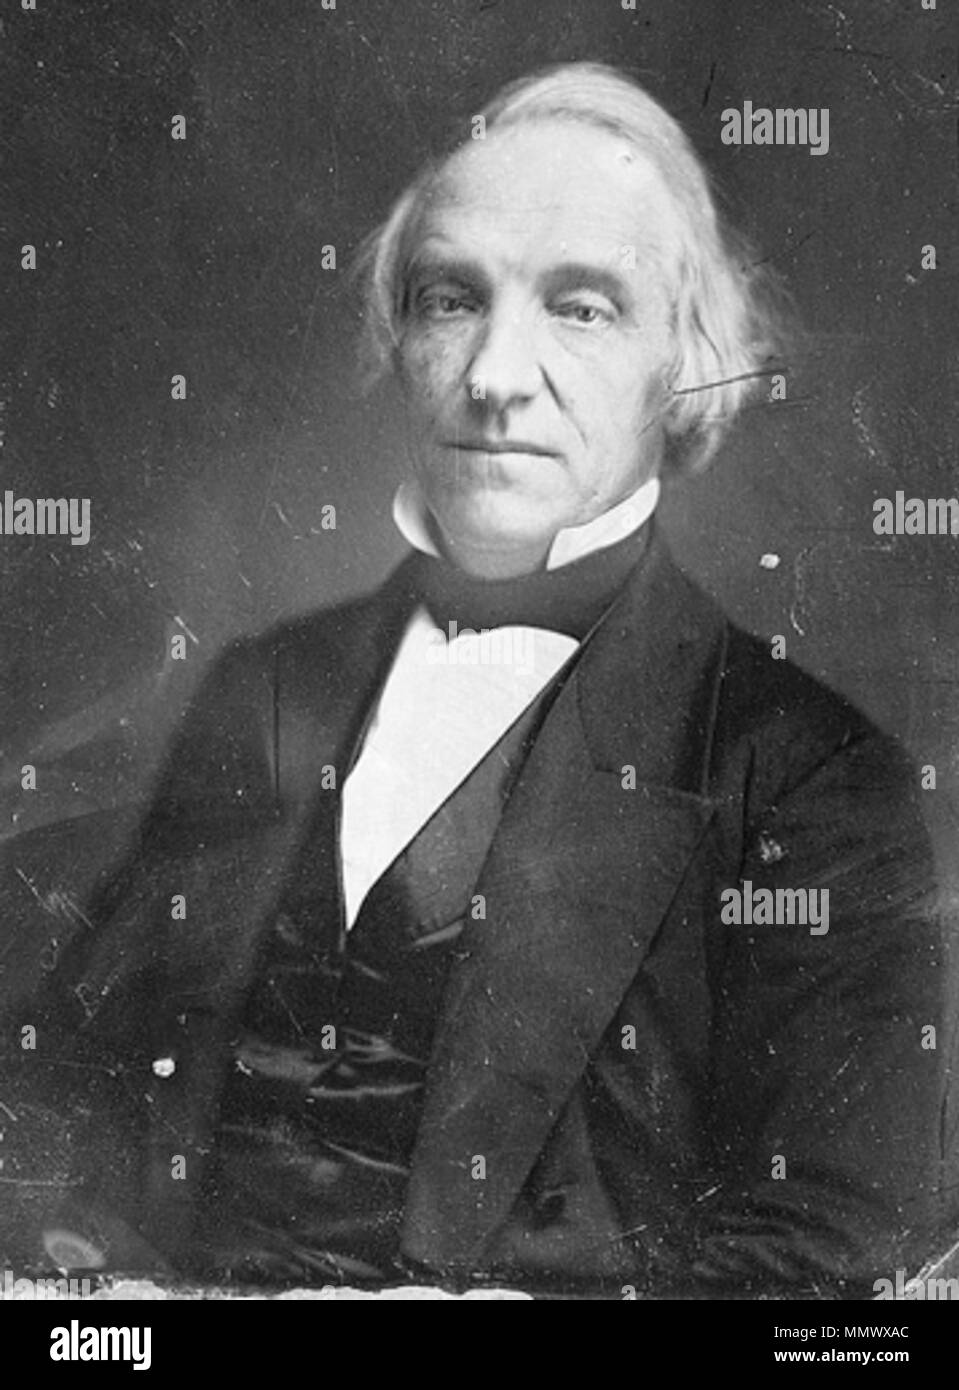 . [Daniel Dickinson, head-and-shoulders portrait, slightly to the left, facing front]. CREATED/PUBLISHED: [between 1844 and 1860] SUMMARY: Democratic Senator from New York, 1844-1851. NOTES: Identification from mezzotint based on daguerreotype ascribed to Plumbe, Democratic Review, August 1846. Scratched on back of plate: J. Dickinson, N.Y. Forms part of: Daguerreotype collection (Library of Congress). Produced by Mathew Brady's studio. REPOSITORY: Library of Congress Prints and Photographs Division Washington, D.C. 20540 USA DanielDickinson ca1840s byJohnPlumbe LOC Stock Photo